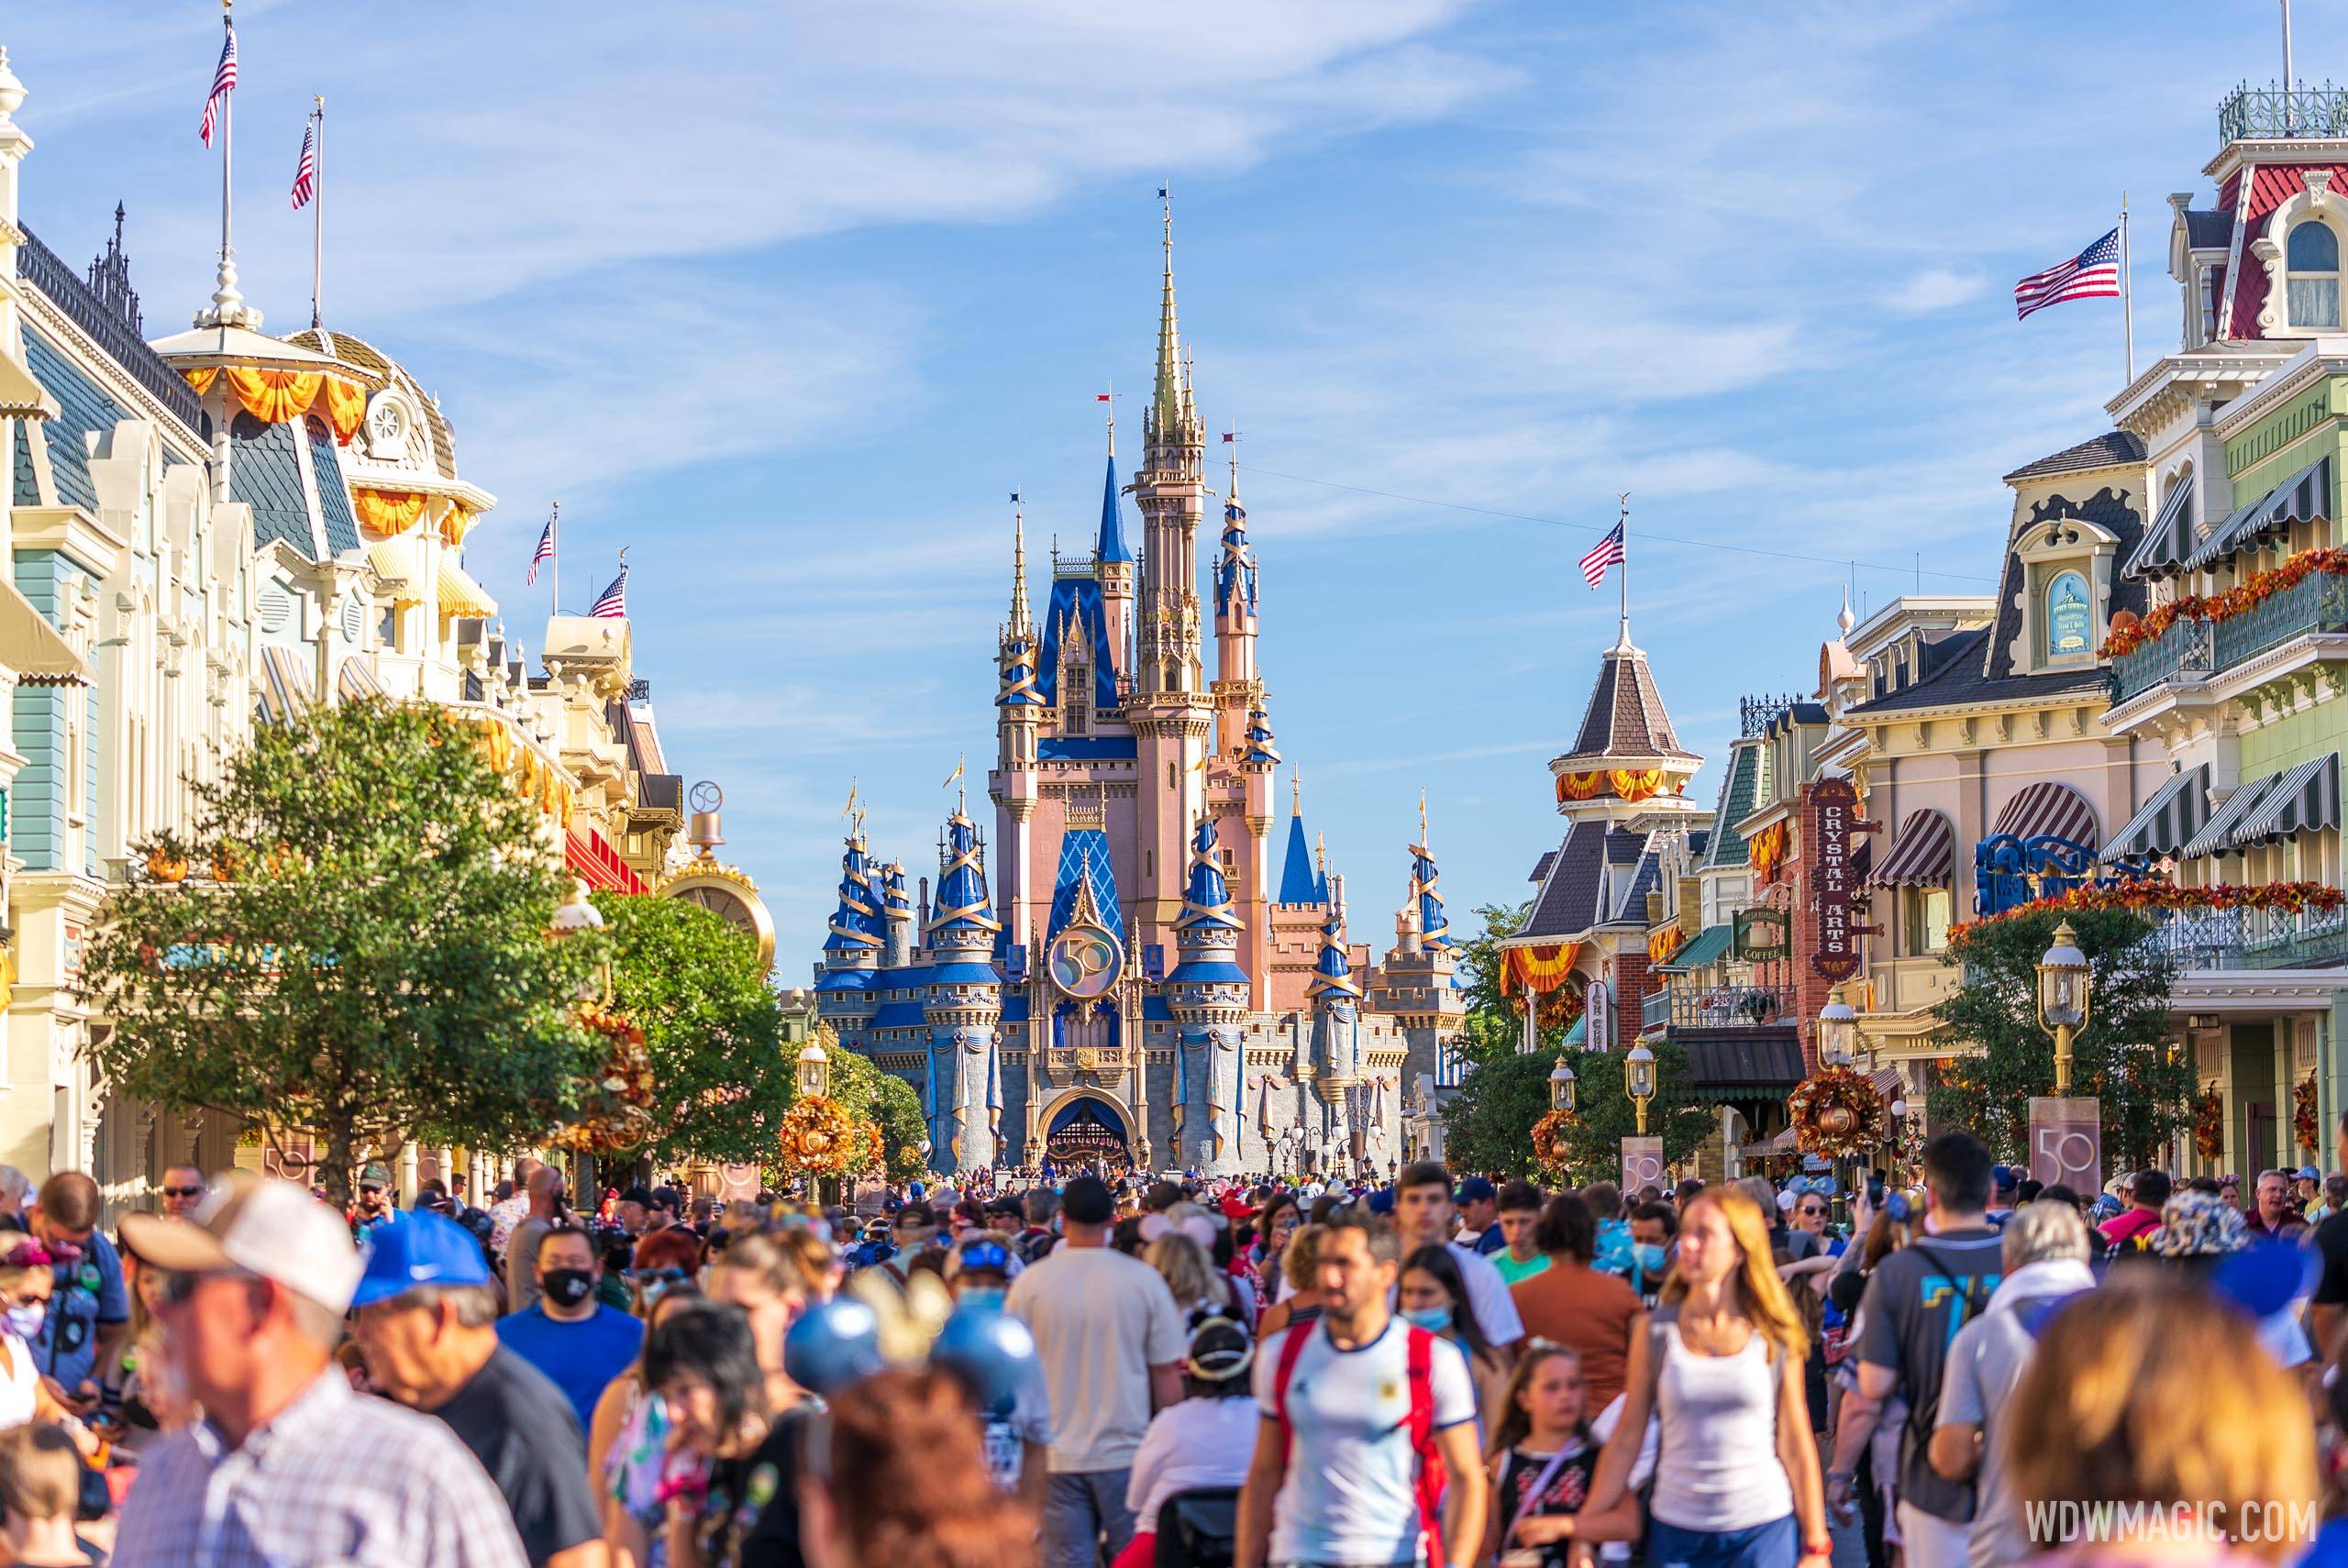 Guest spending is up 40 percent over 2019